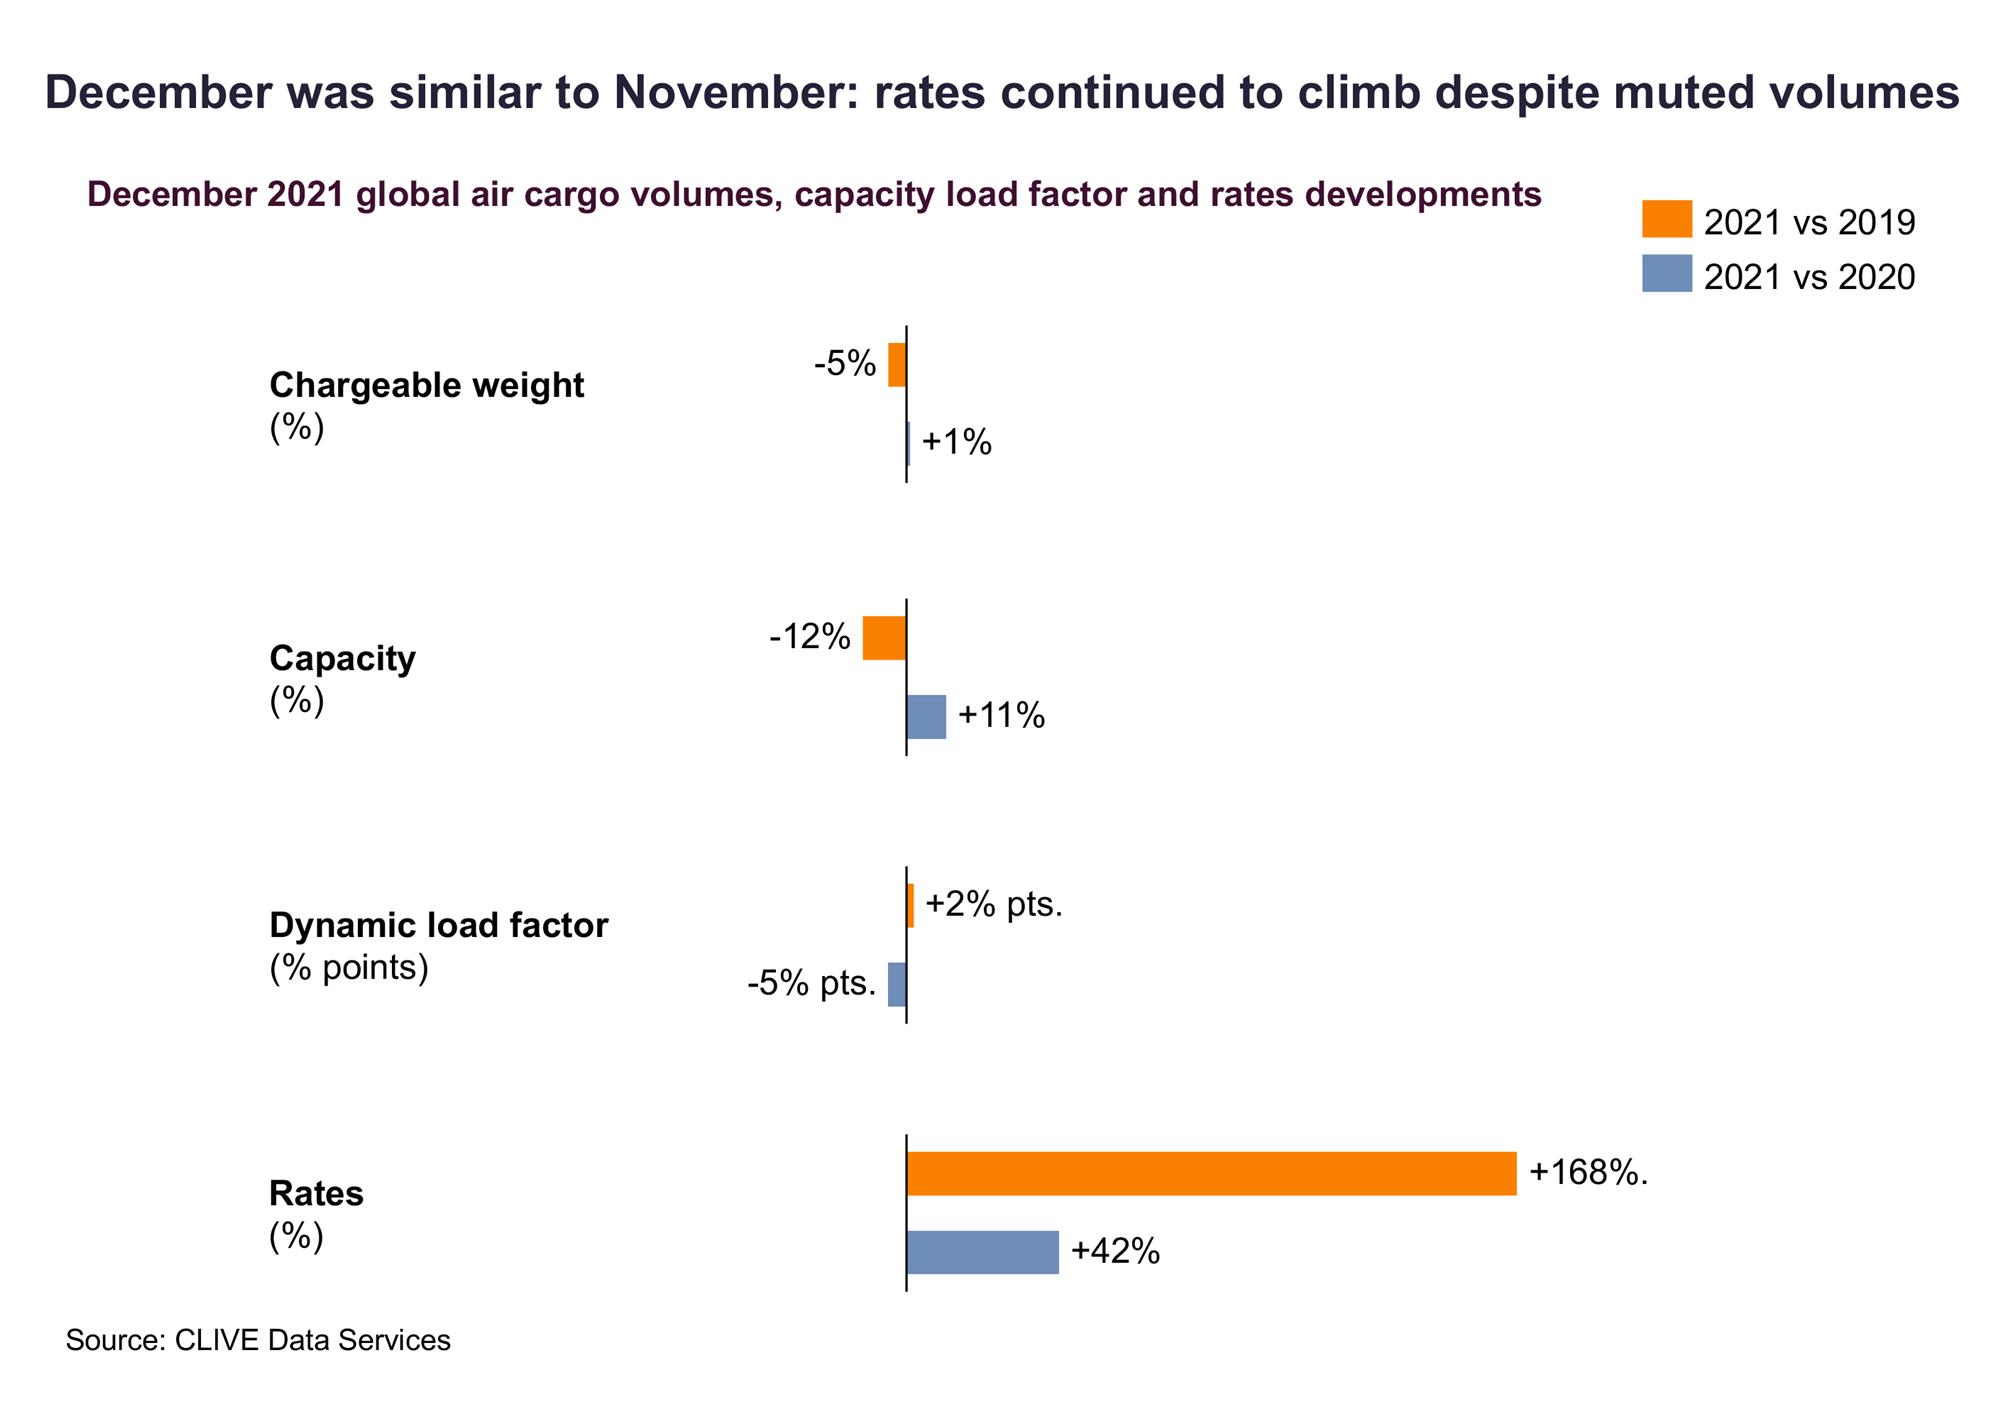 Self Photos / Files - December was similar to November - rates continued to climb despite muted volumes